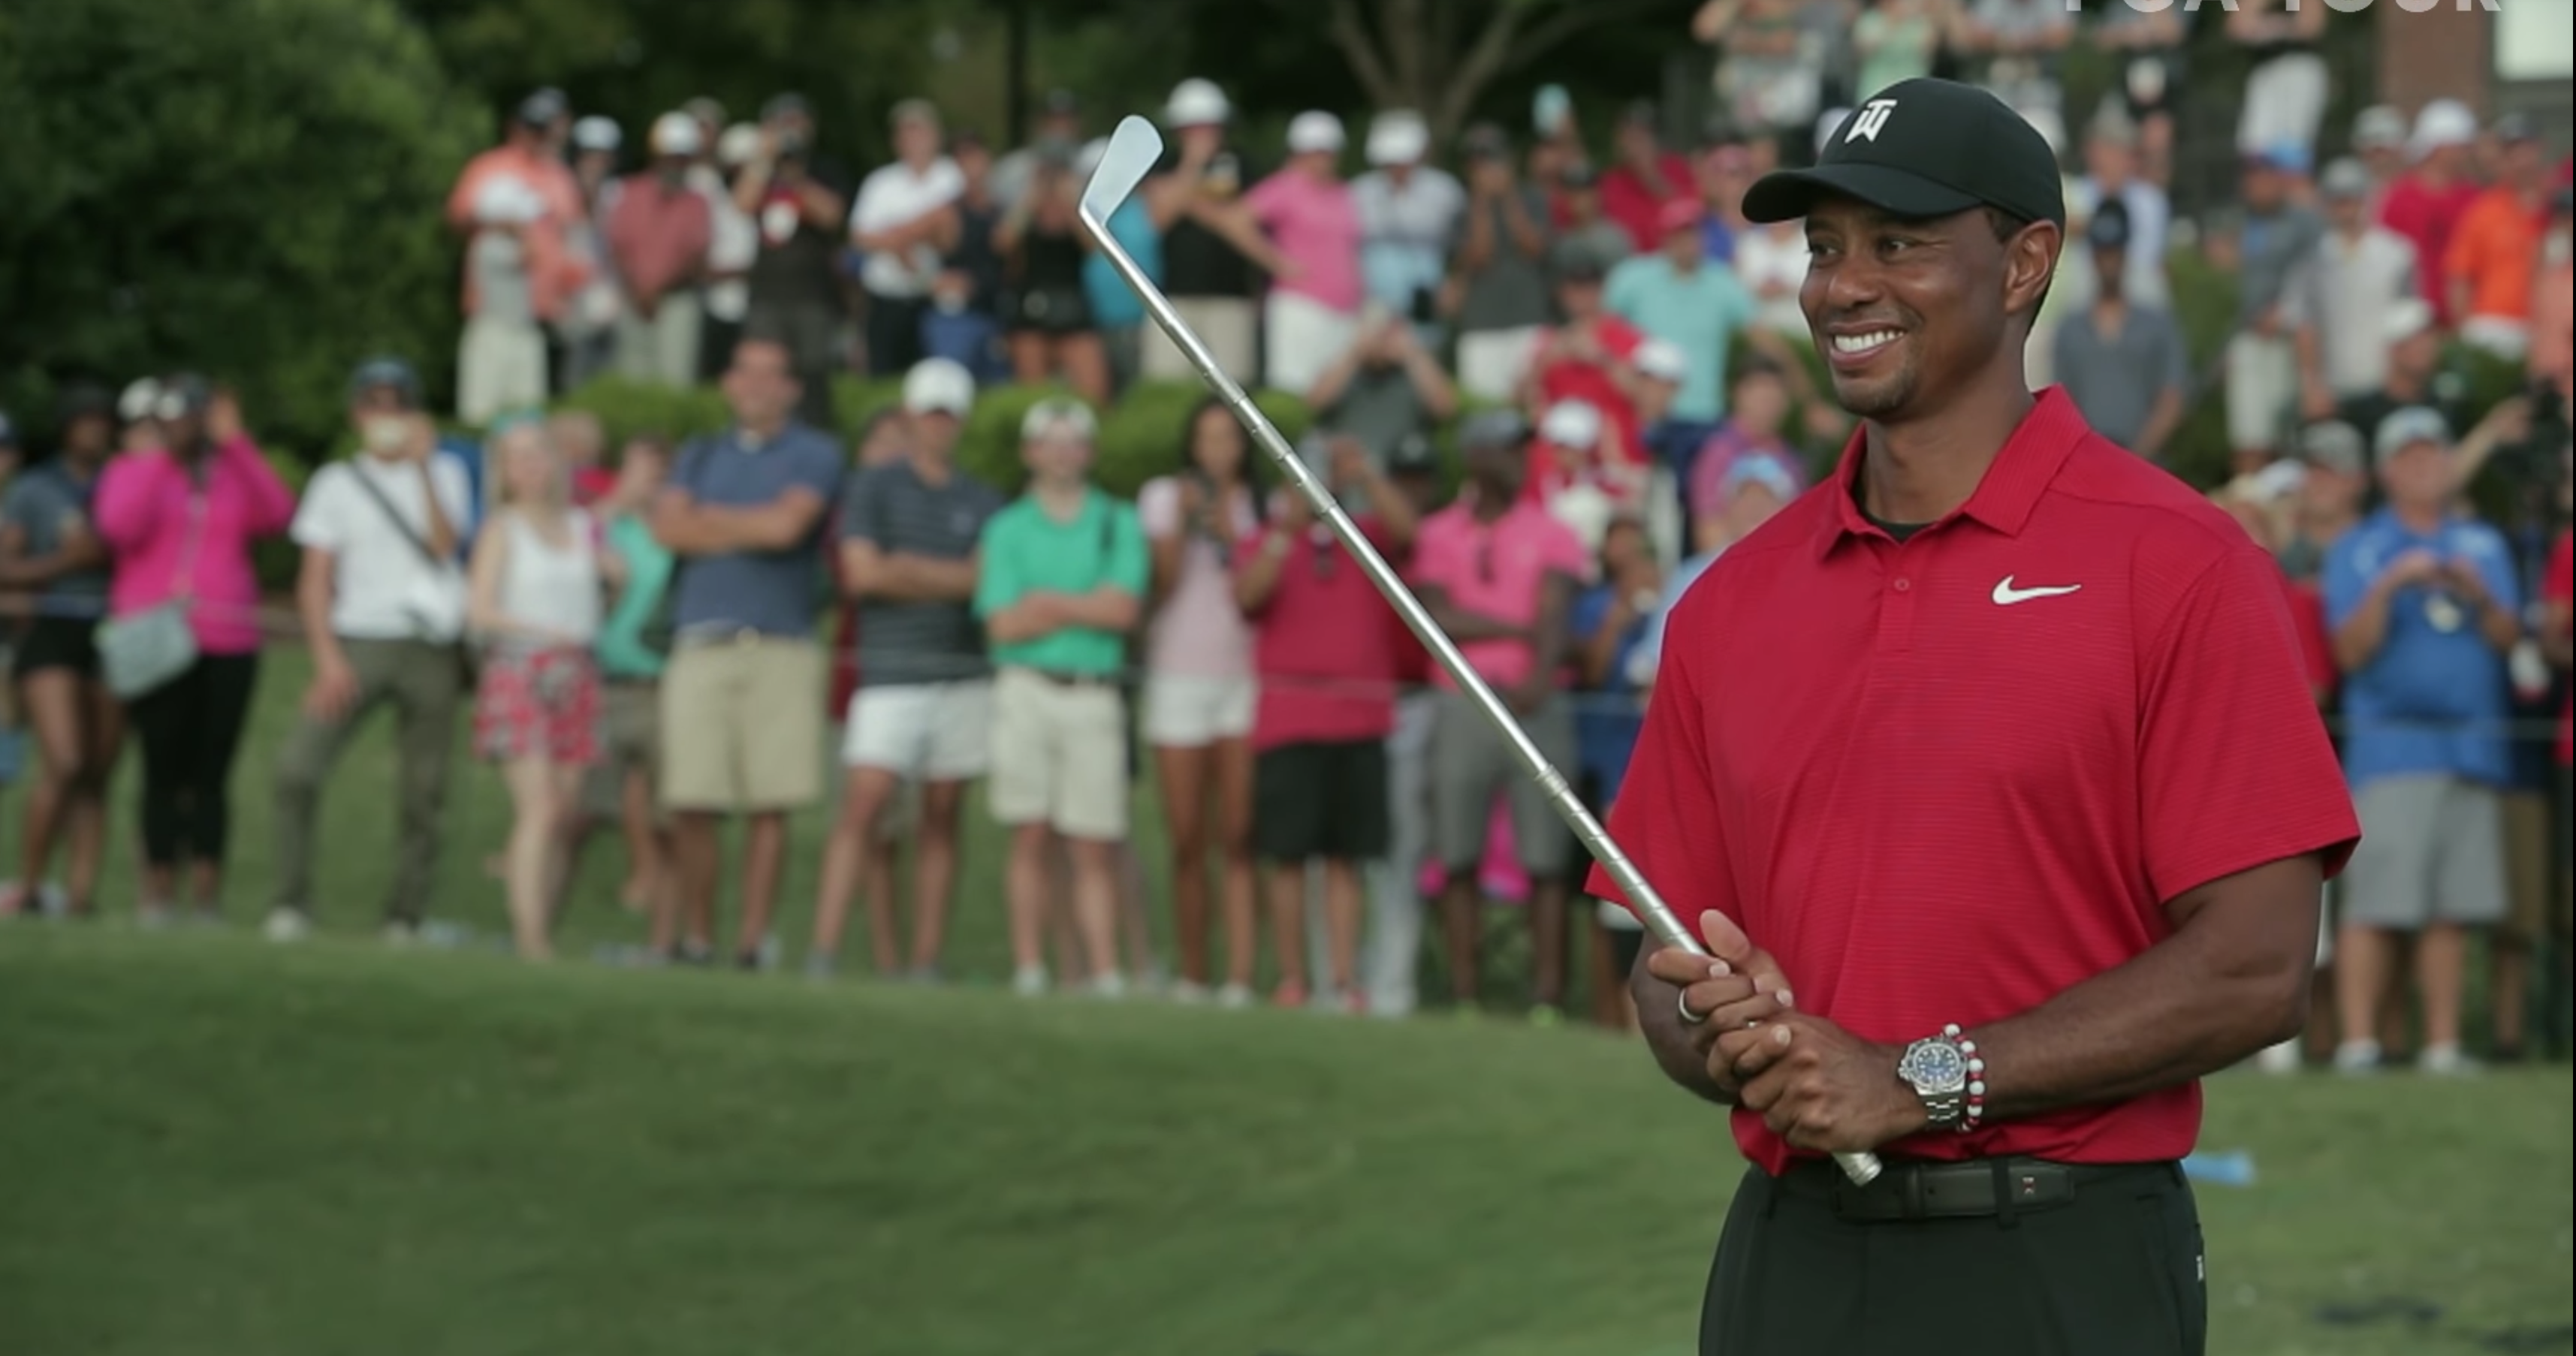 Tiger Woods wins first major competition in 5 years